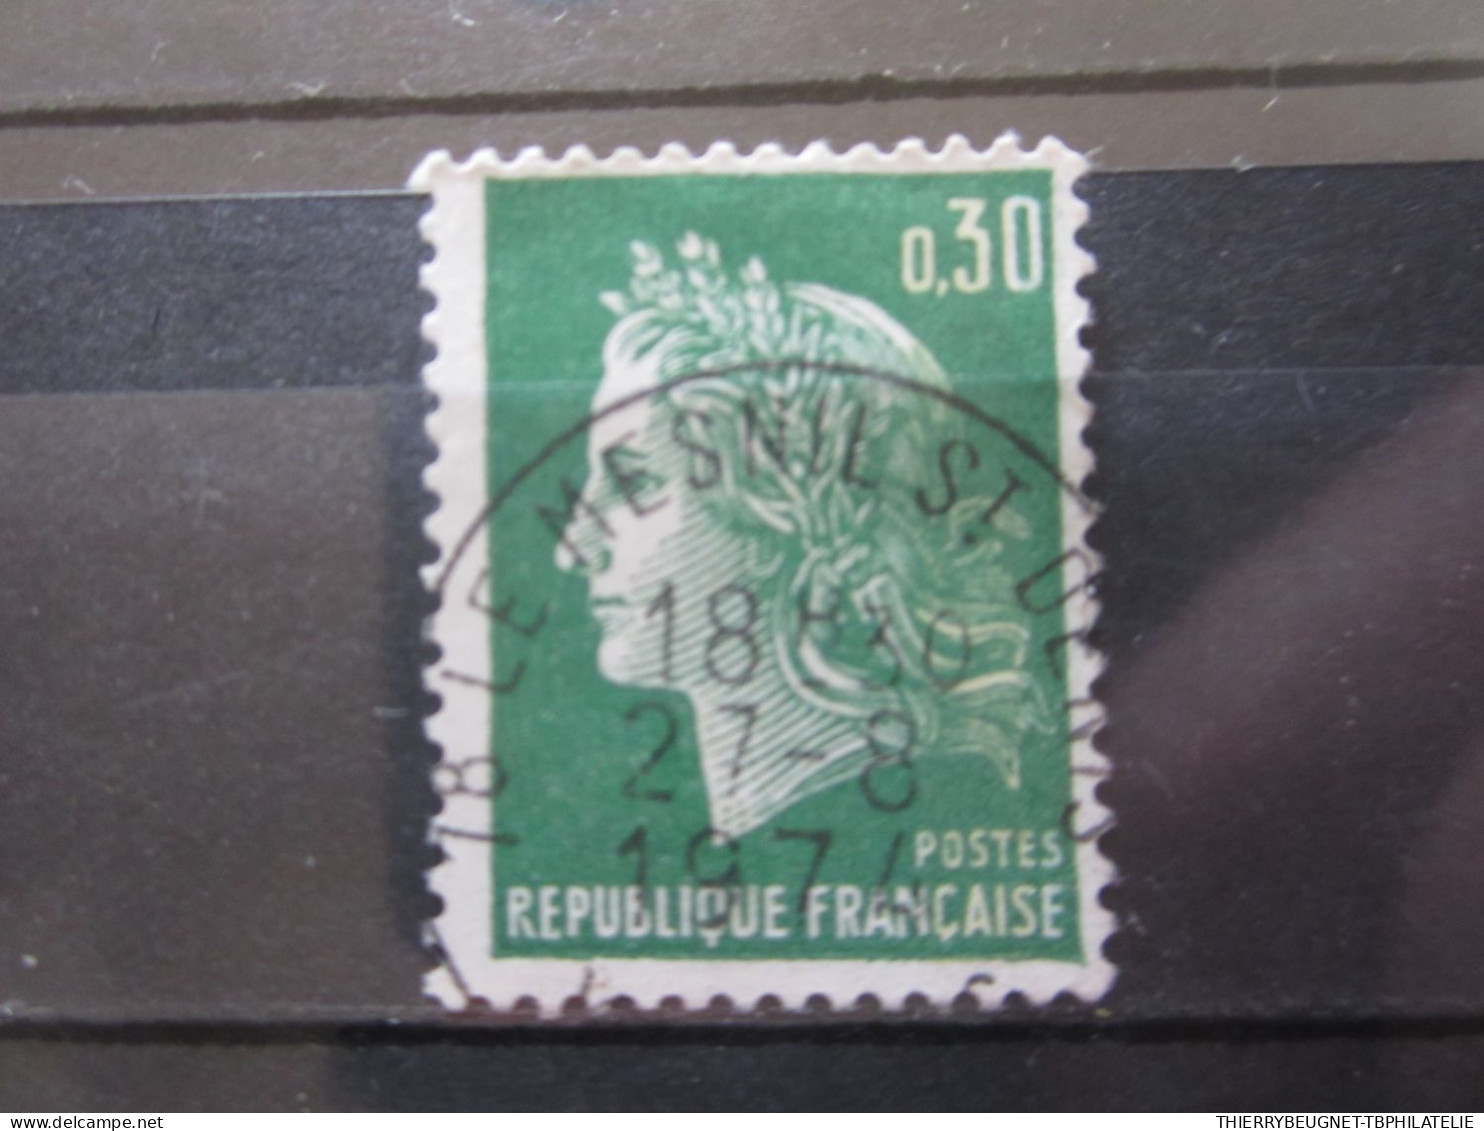 BEAU TIMBRE FRANCE N° 1611 - OBLITERATION LE MESNIL ST-DENIS - 1967-1970 Marianne (Cheffer)